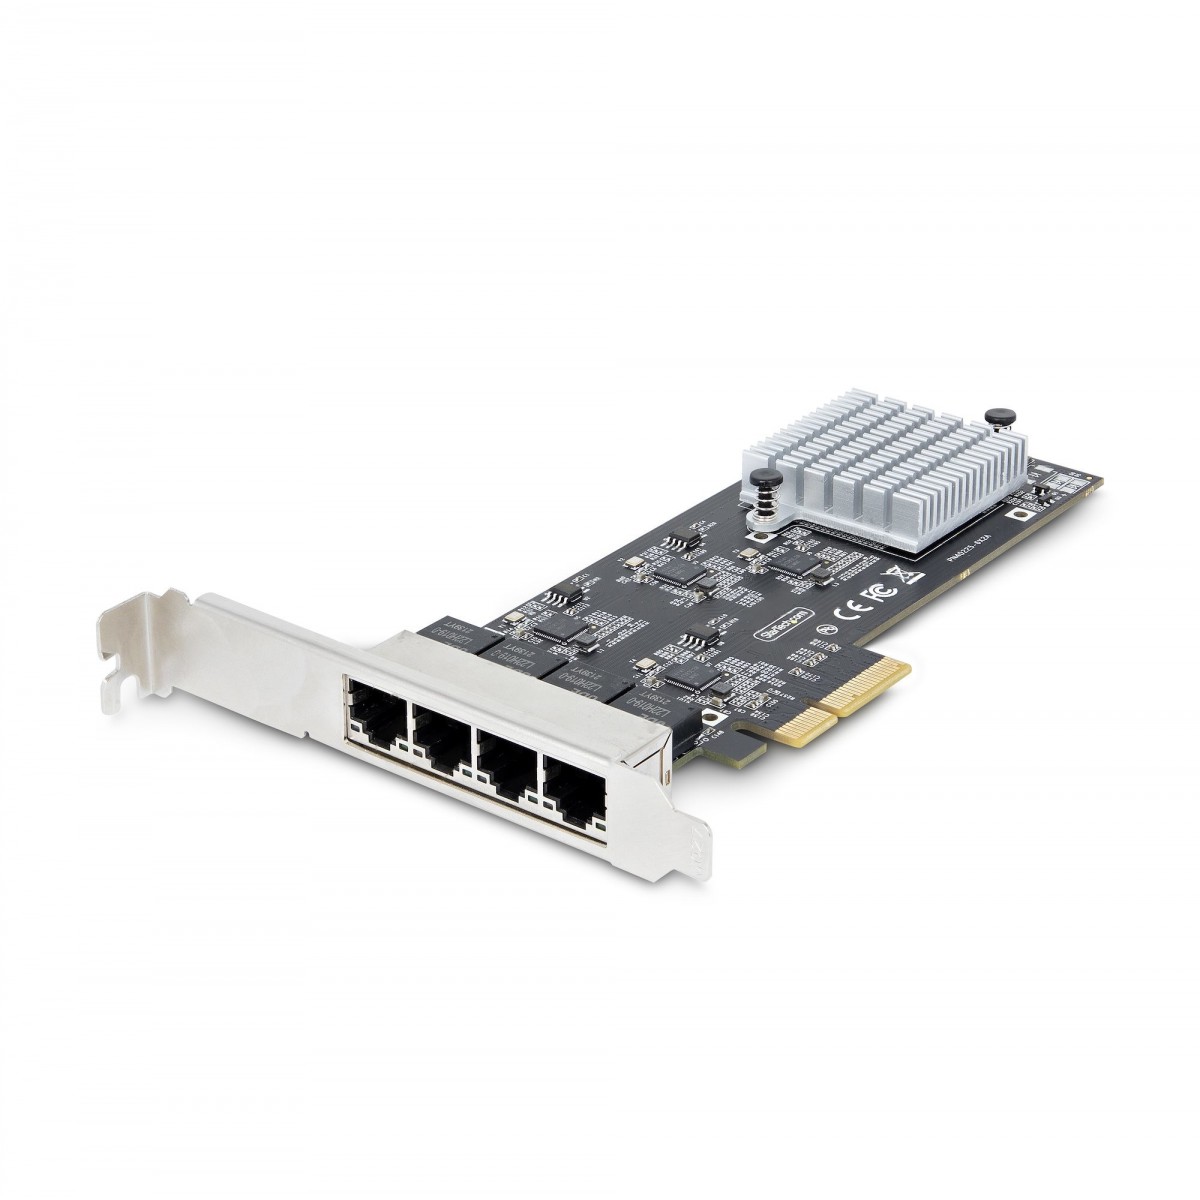 StarTech.com 4-Port NBASE-T 2.5Gbps PCIe Network Card - Network Card - PCI-Express